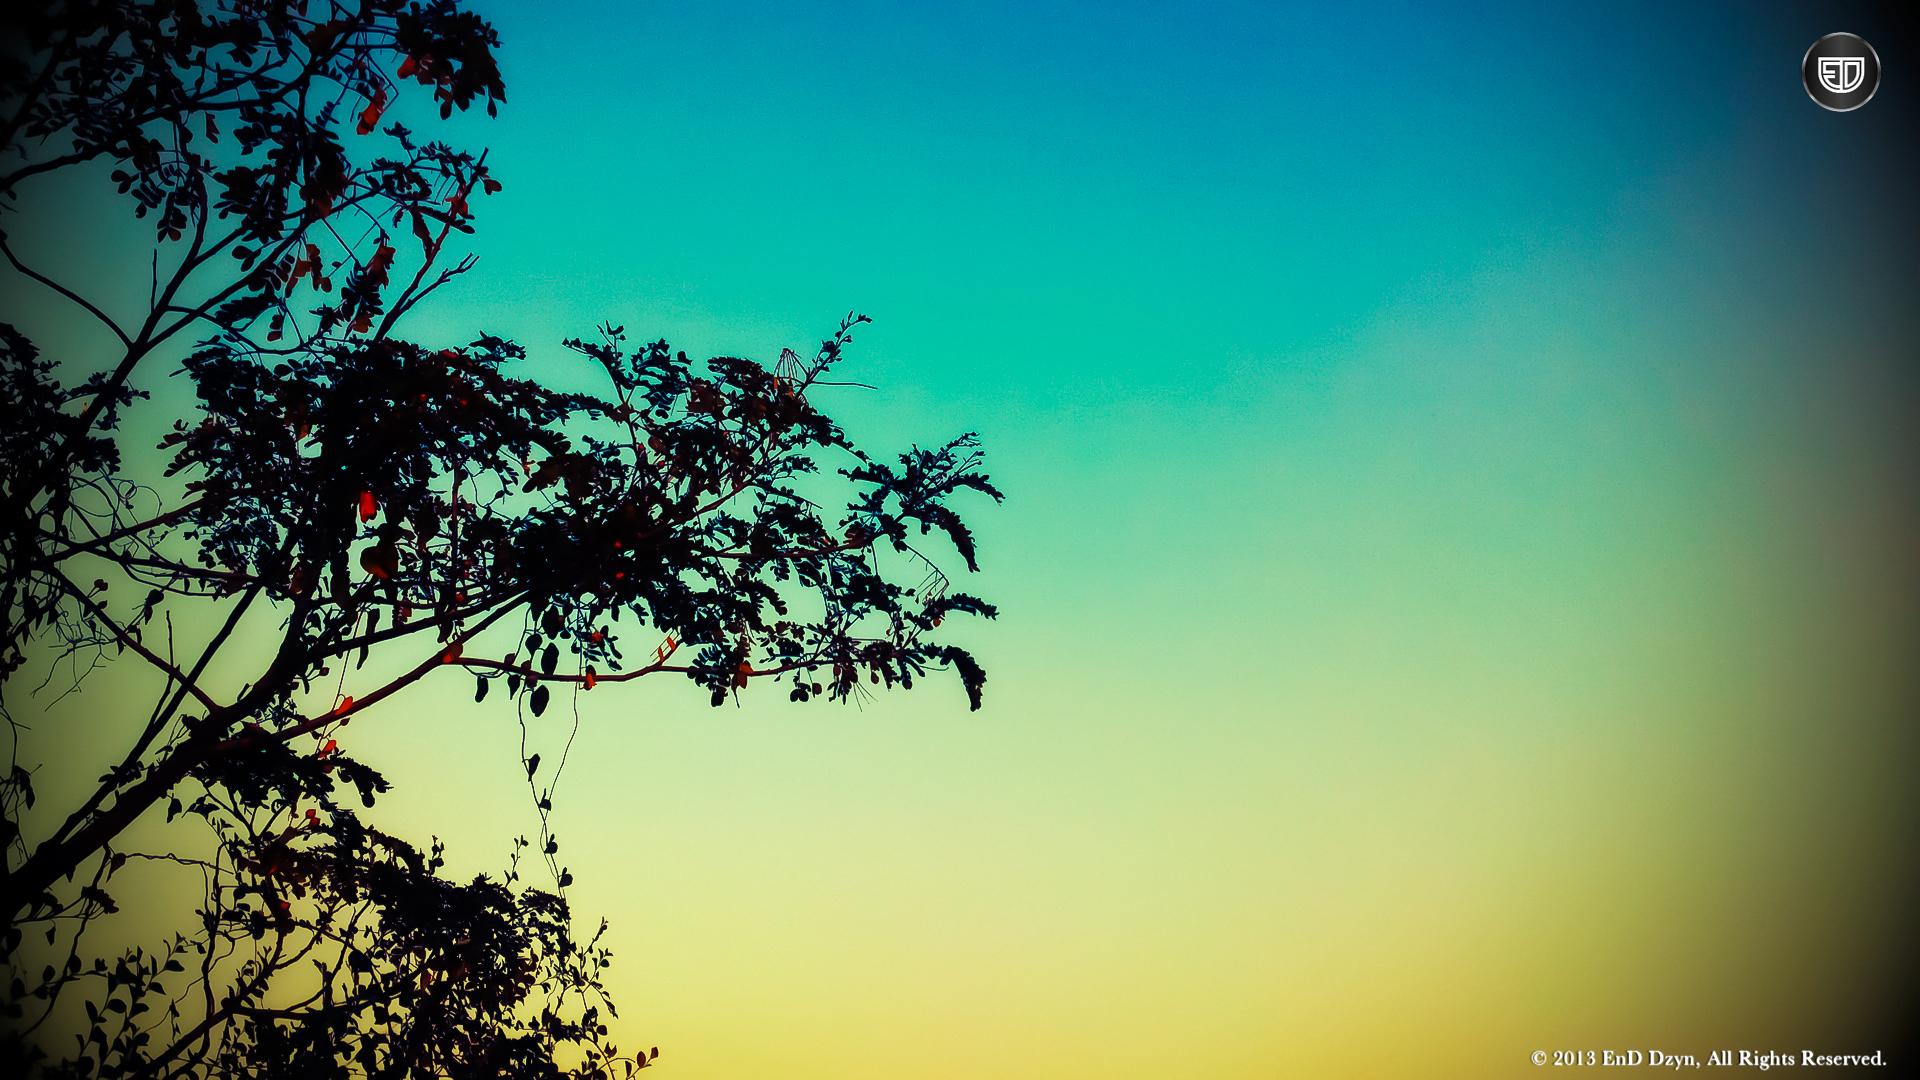 Lomography HD Wallpaper Background Mysterious Tree Silhouette